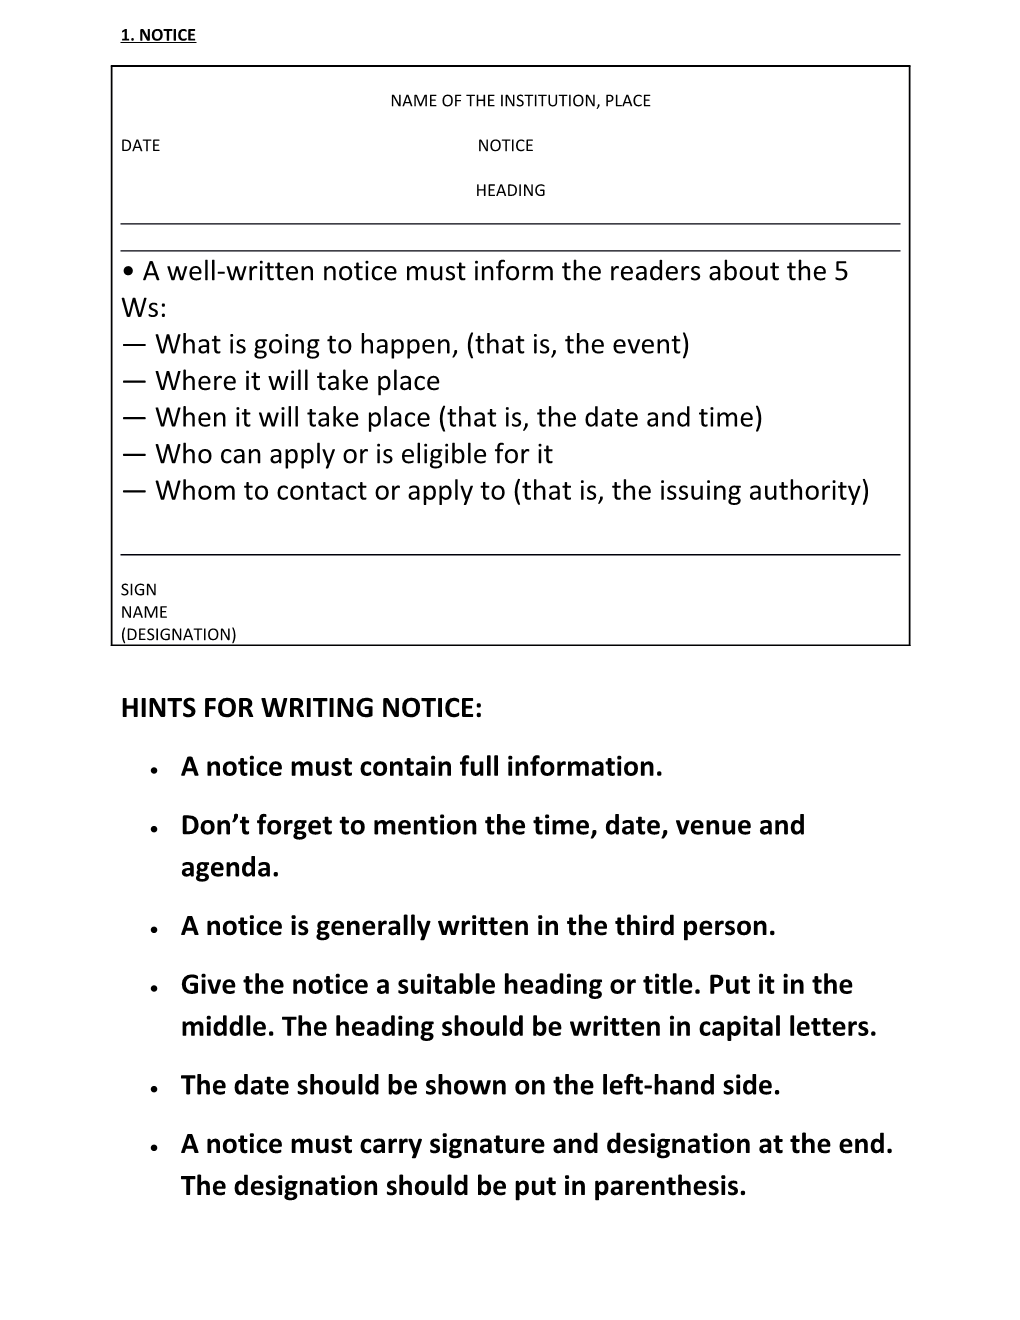 Hints for Writing Notice